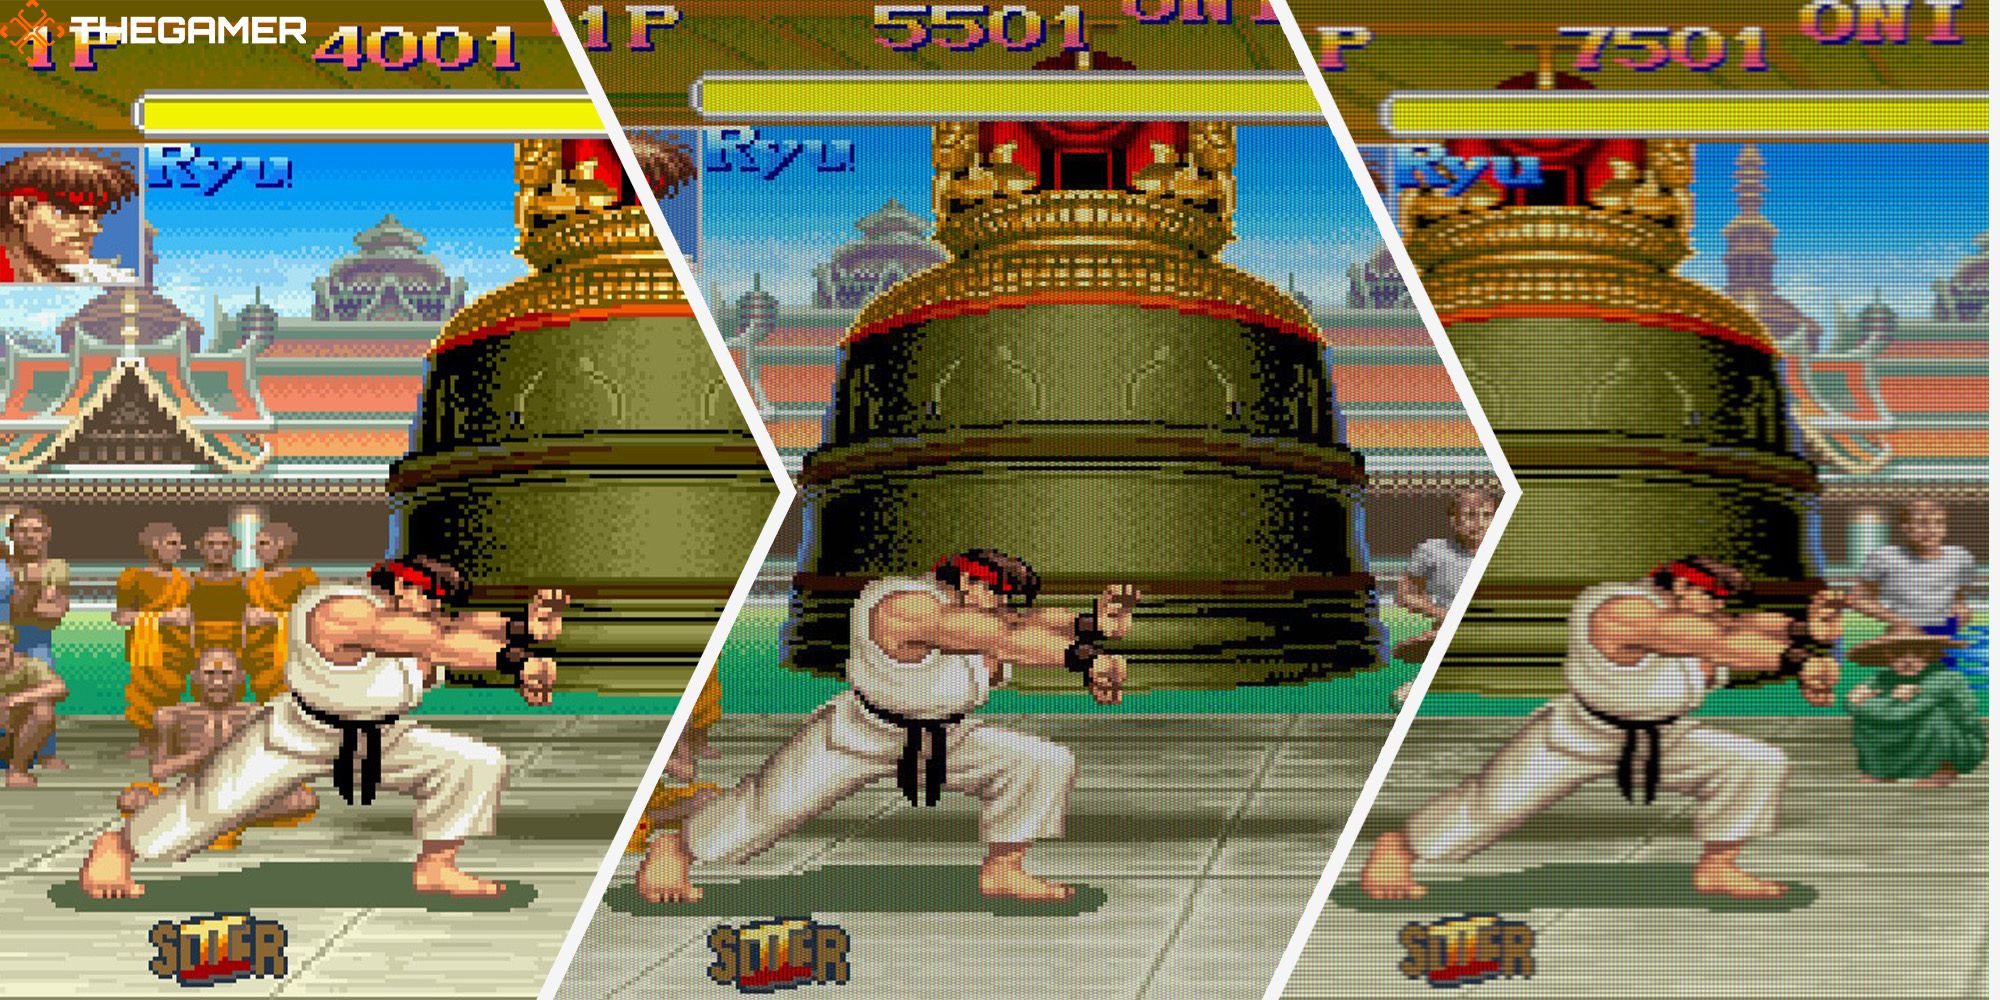 Ryu sends a Hadouken in three different game renderings offered in Capcom Fighting Collection.